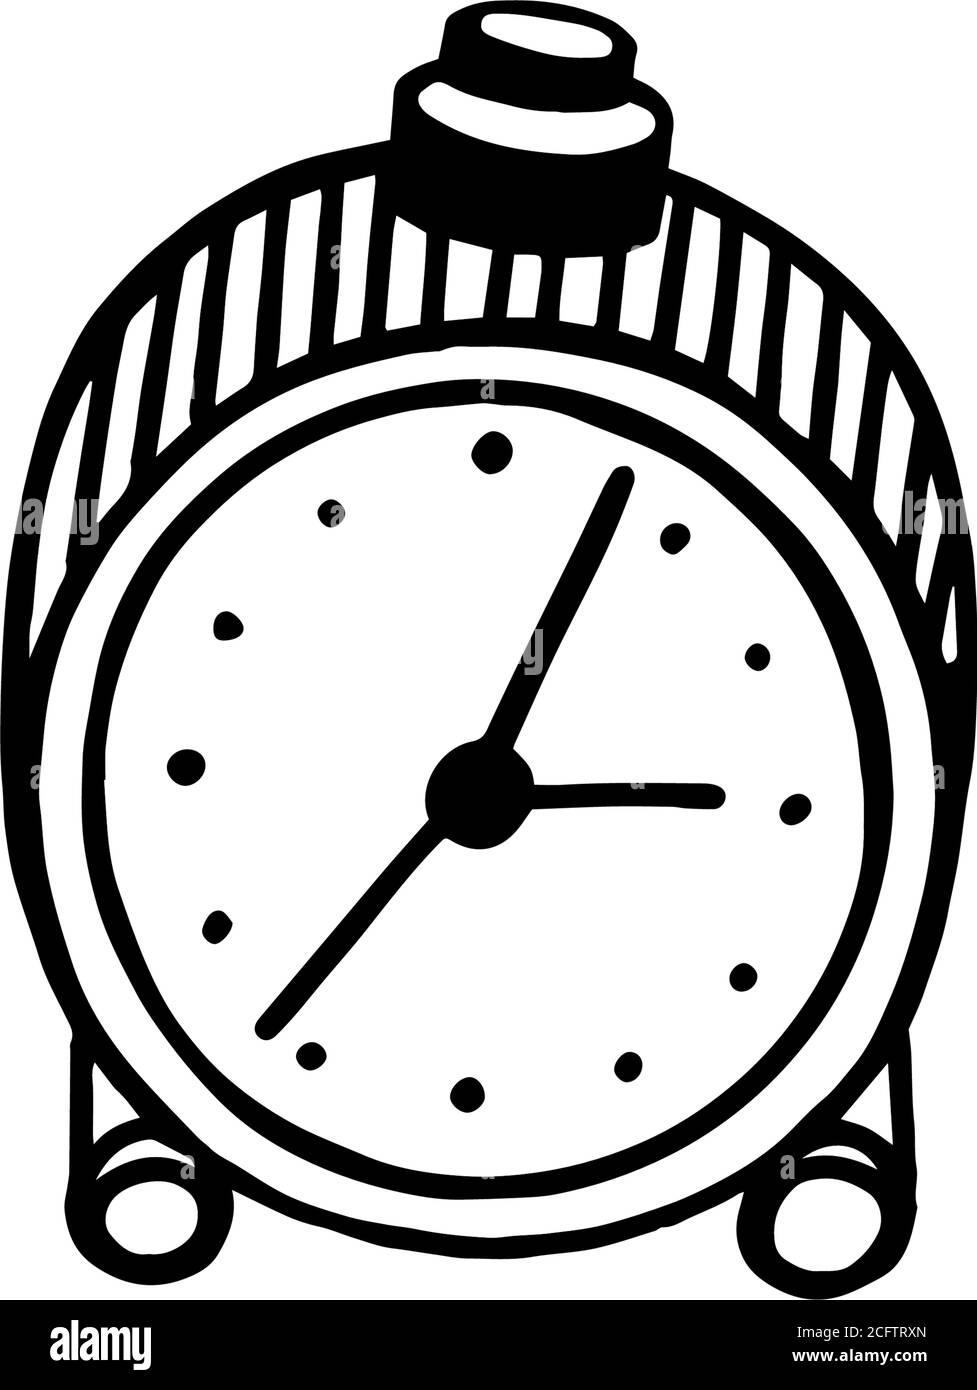 The alarm clock in the style of Doodle.alarm clock Stock Vector